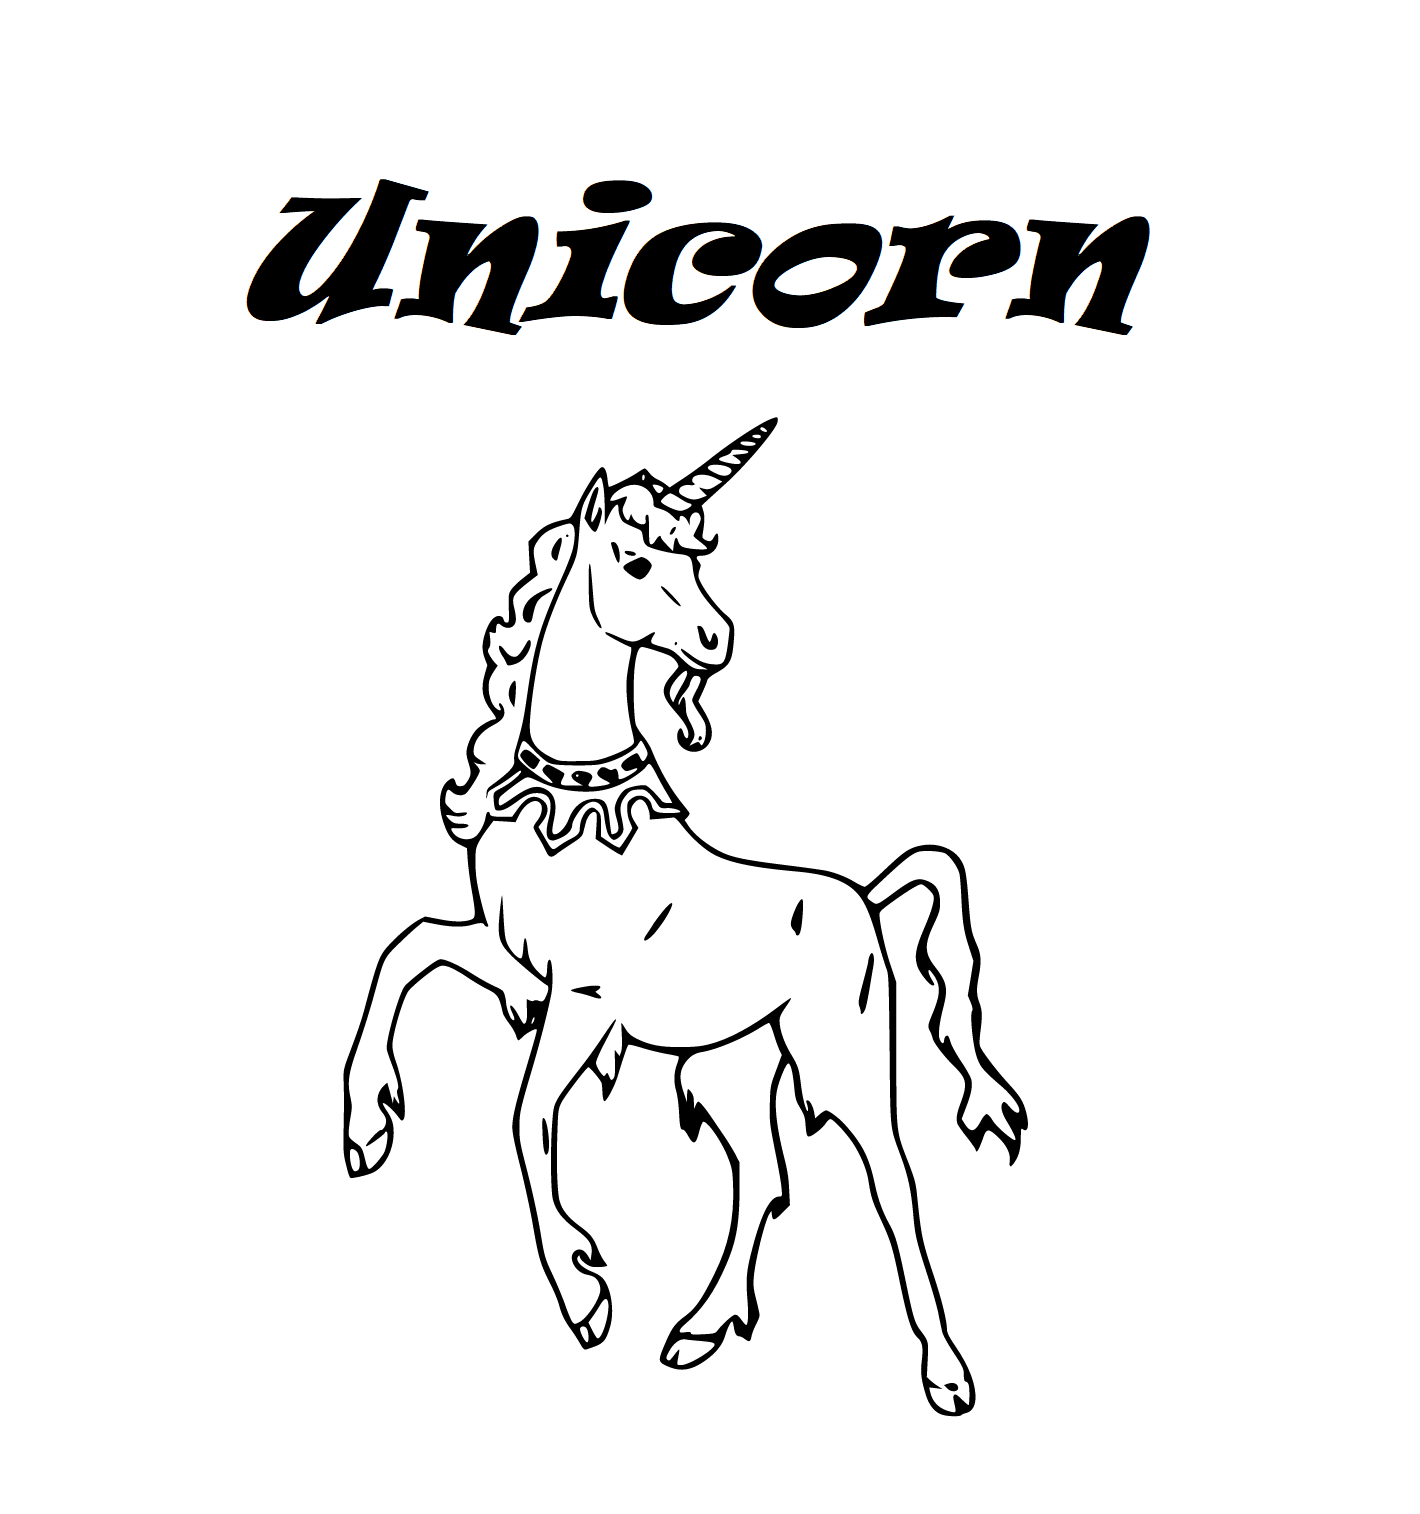 Printable Unicorn drawing to color Coloring Page for kids.